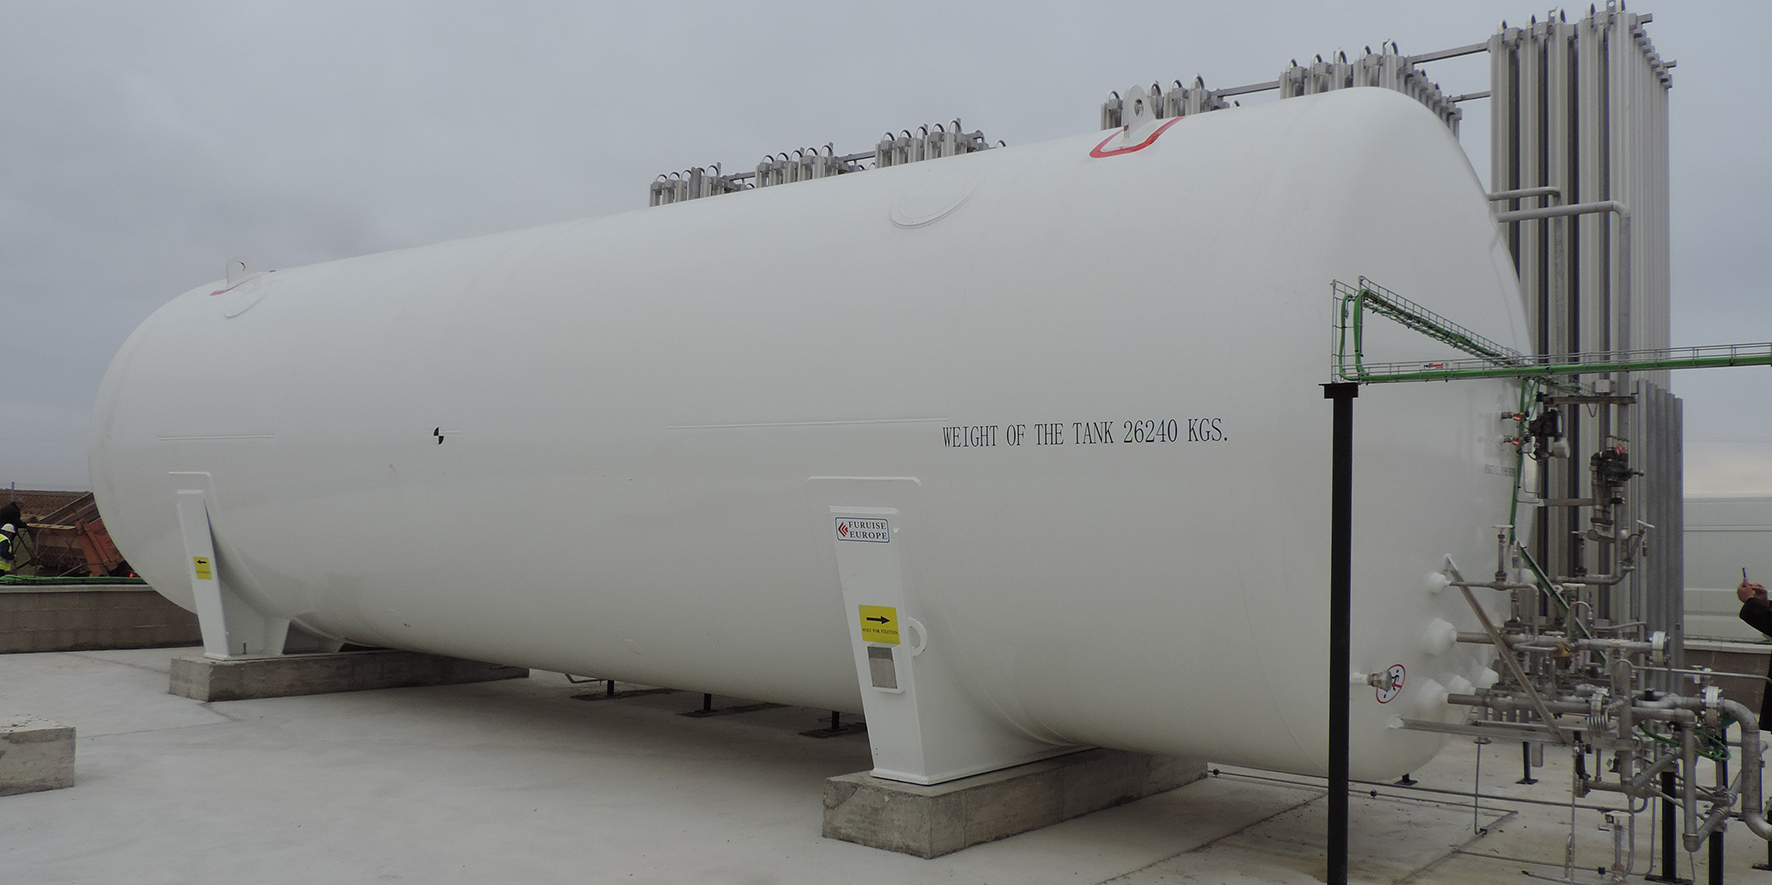 Cryogenic Tanks for Liquefied Natural Gas (LNG) - Furuise Europe